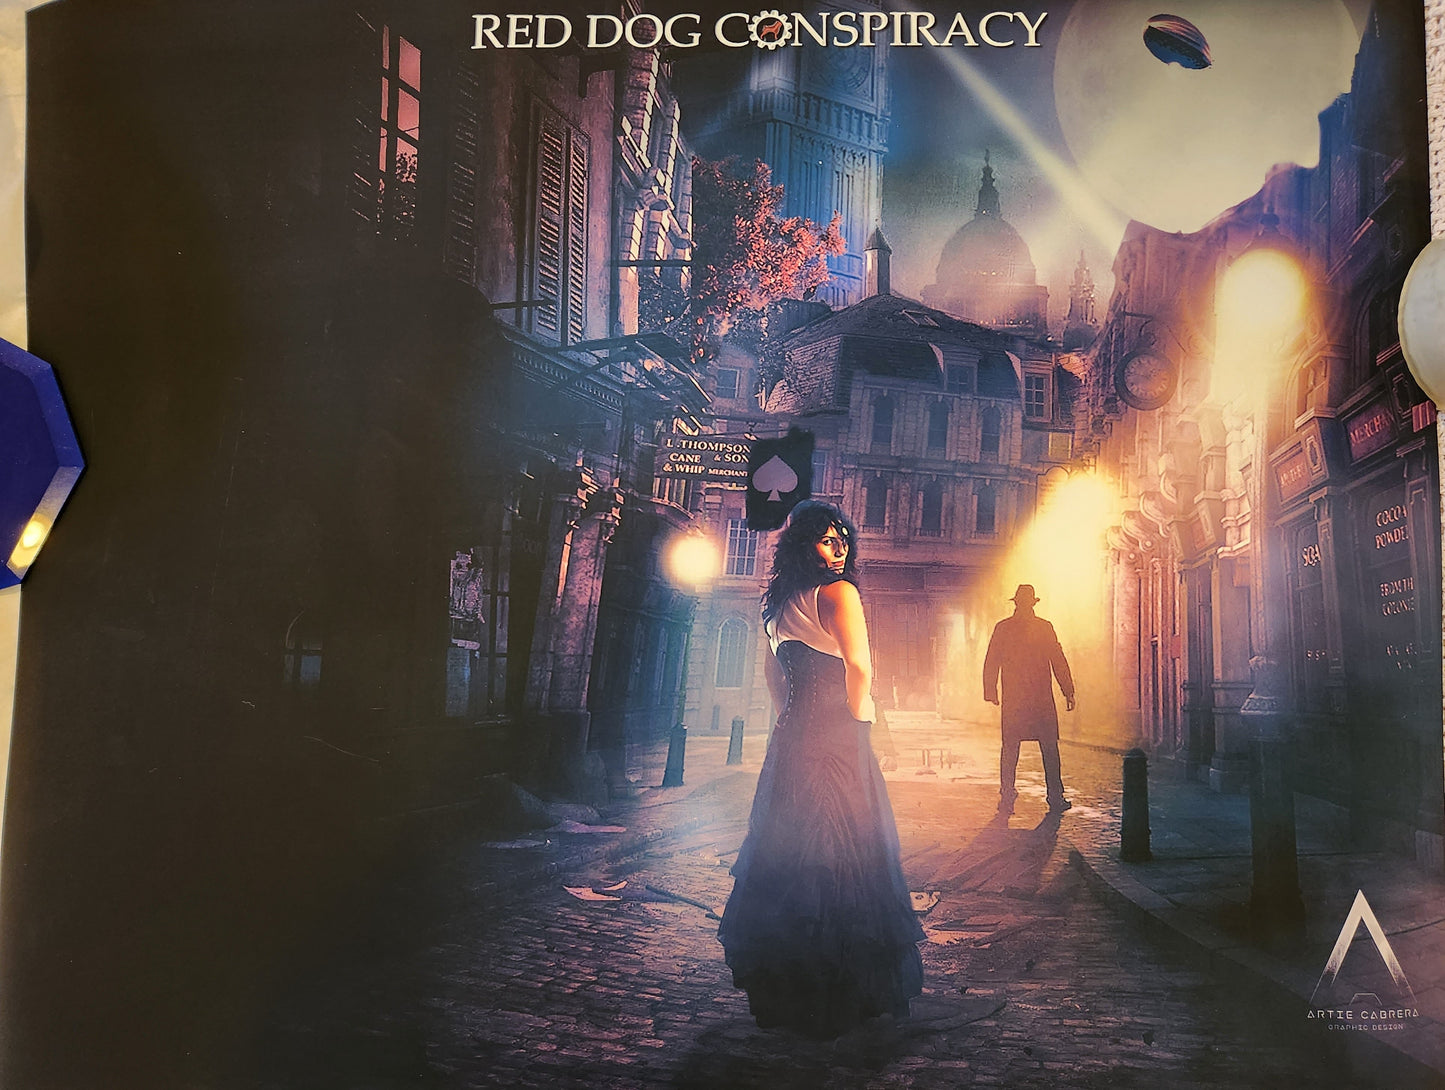 Red Dog Conspiracy Poster "Mystery" - Patricia Loofbourrow